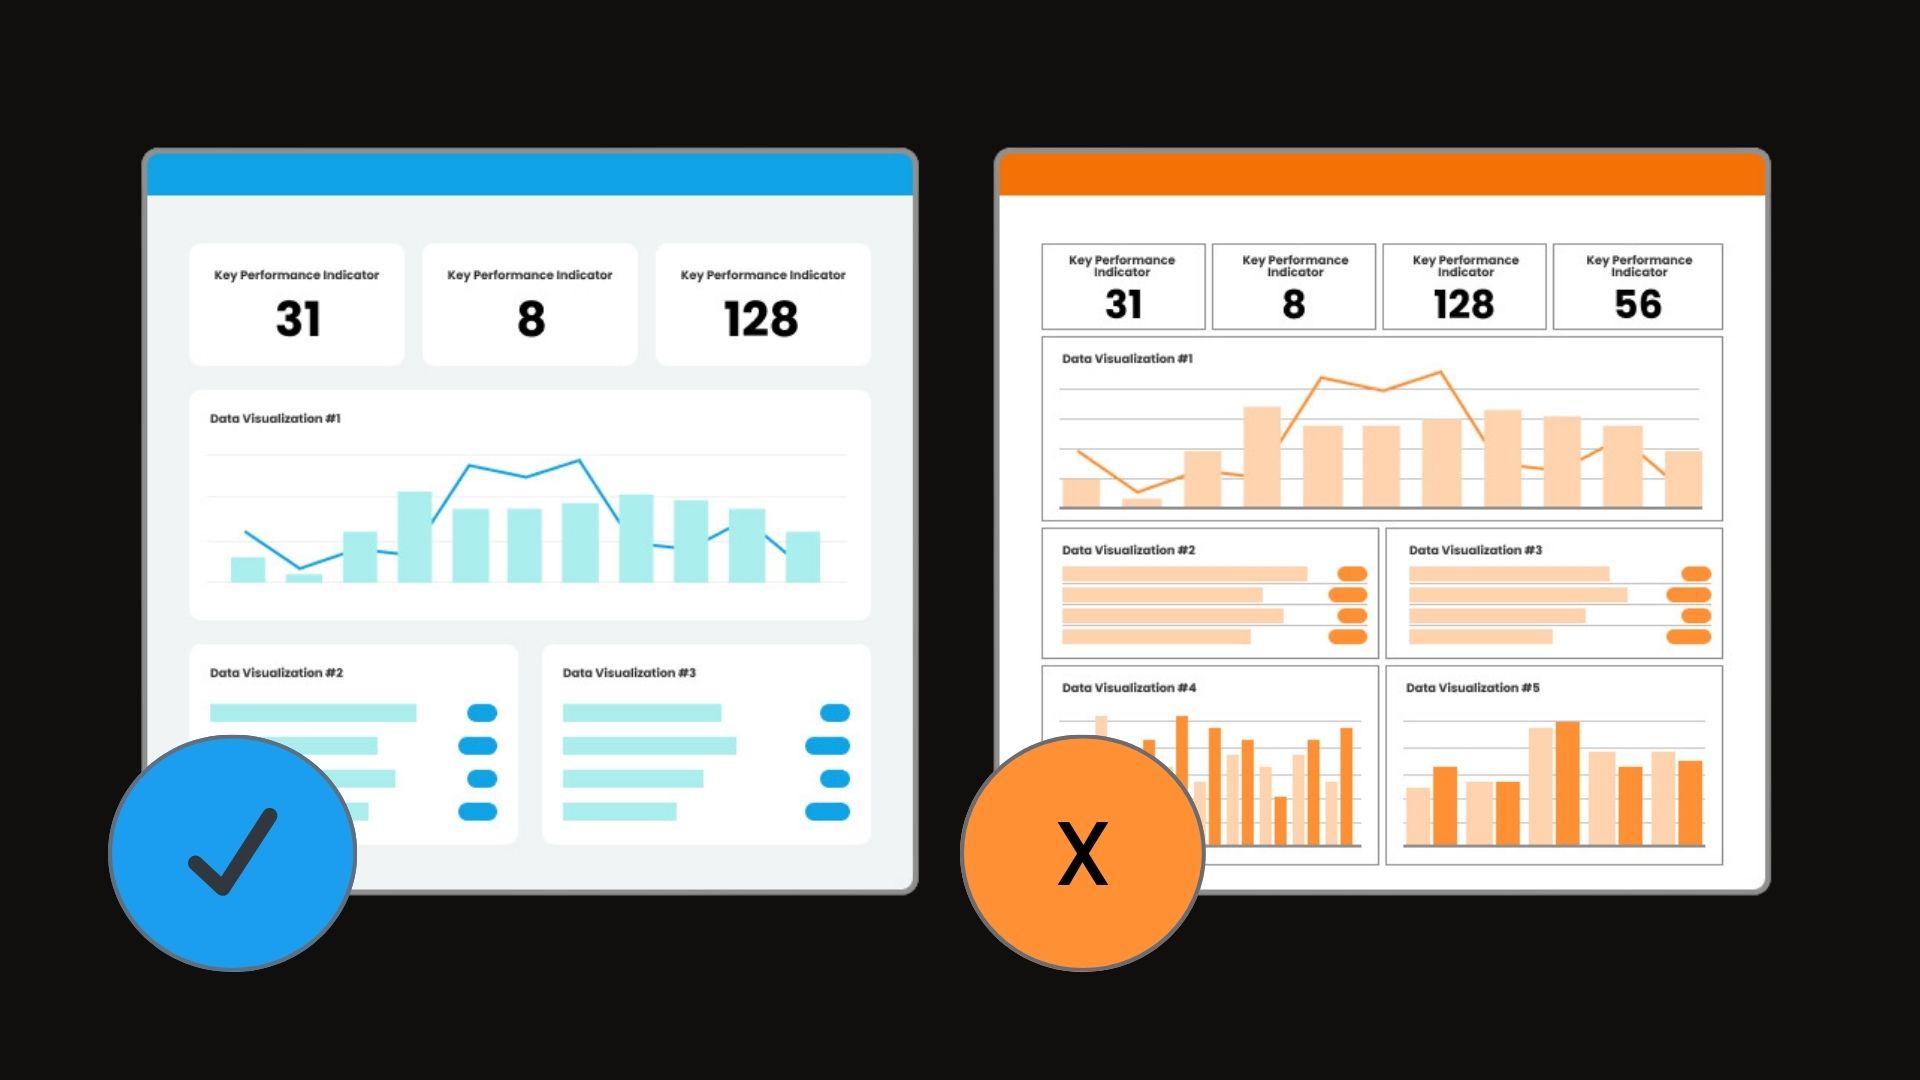 3 Easy Design Tips to Make Your Dashboards Better